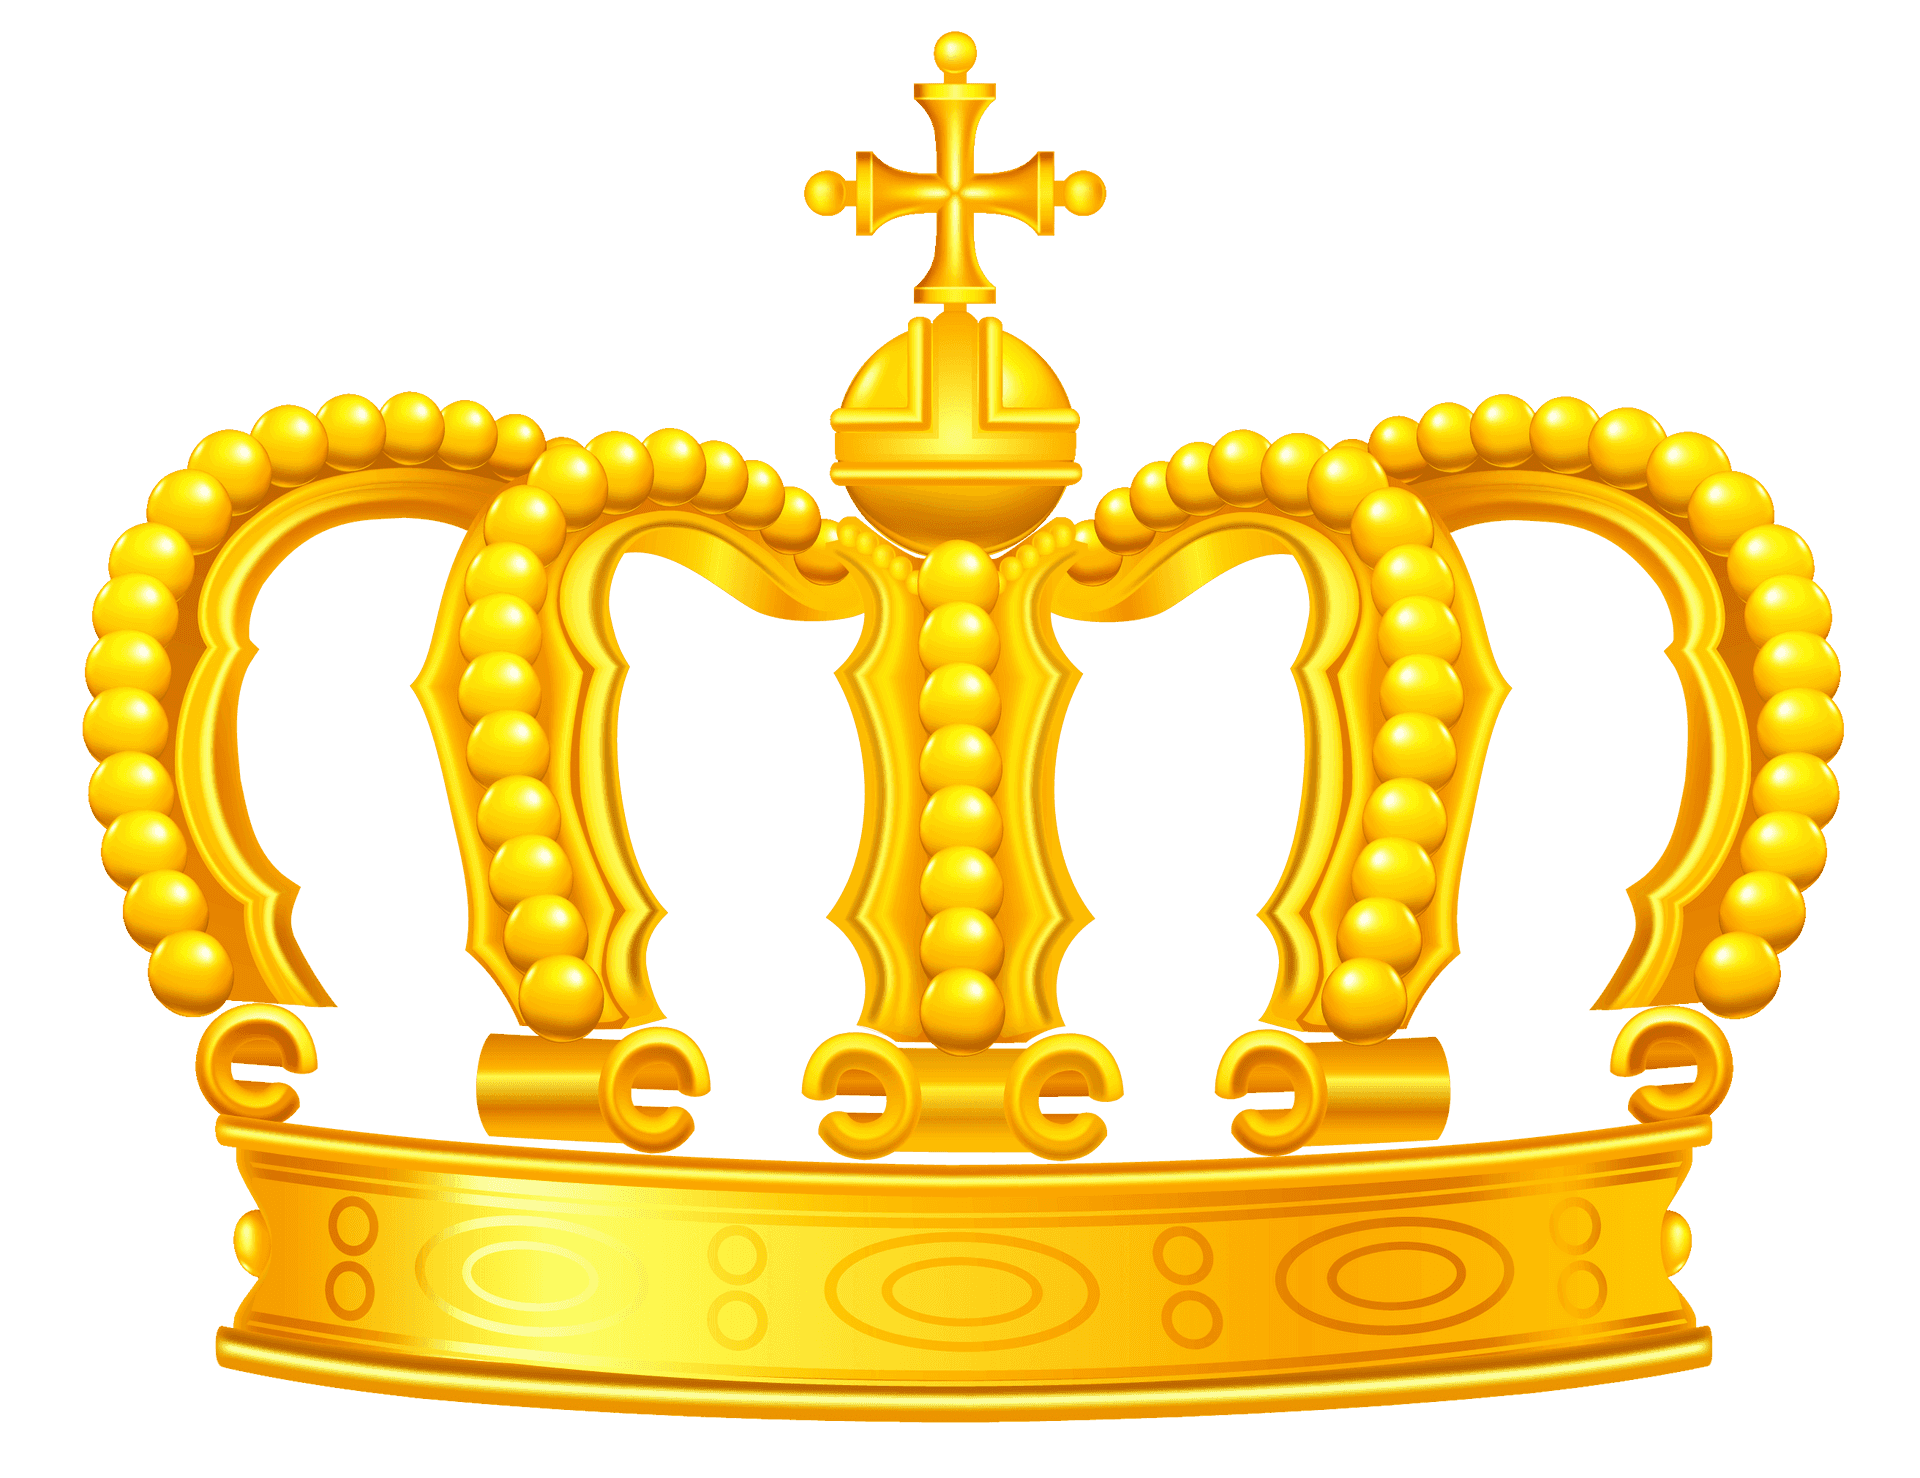 A majestic gold crown set against a vibrant turquoise background